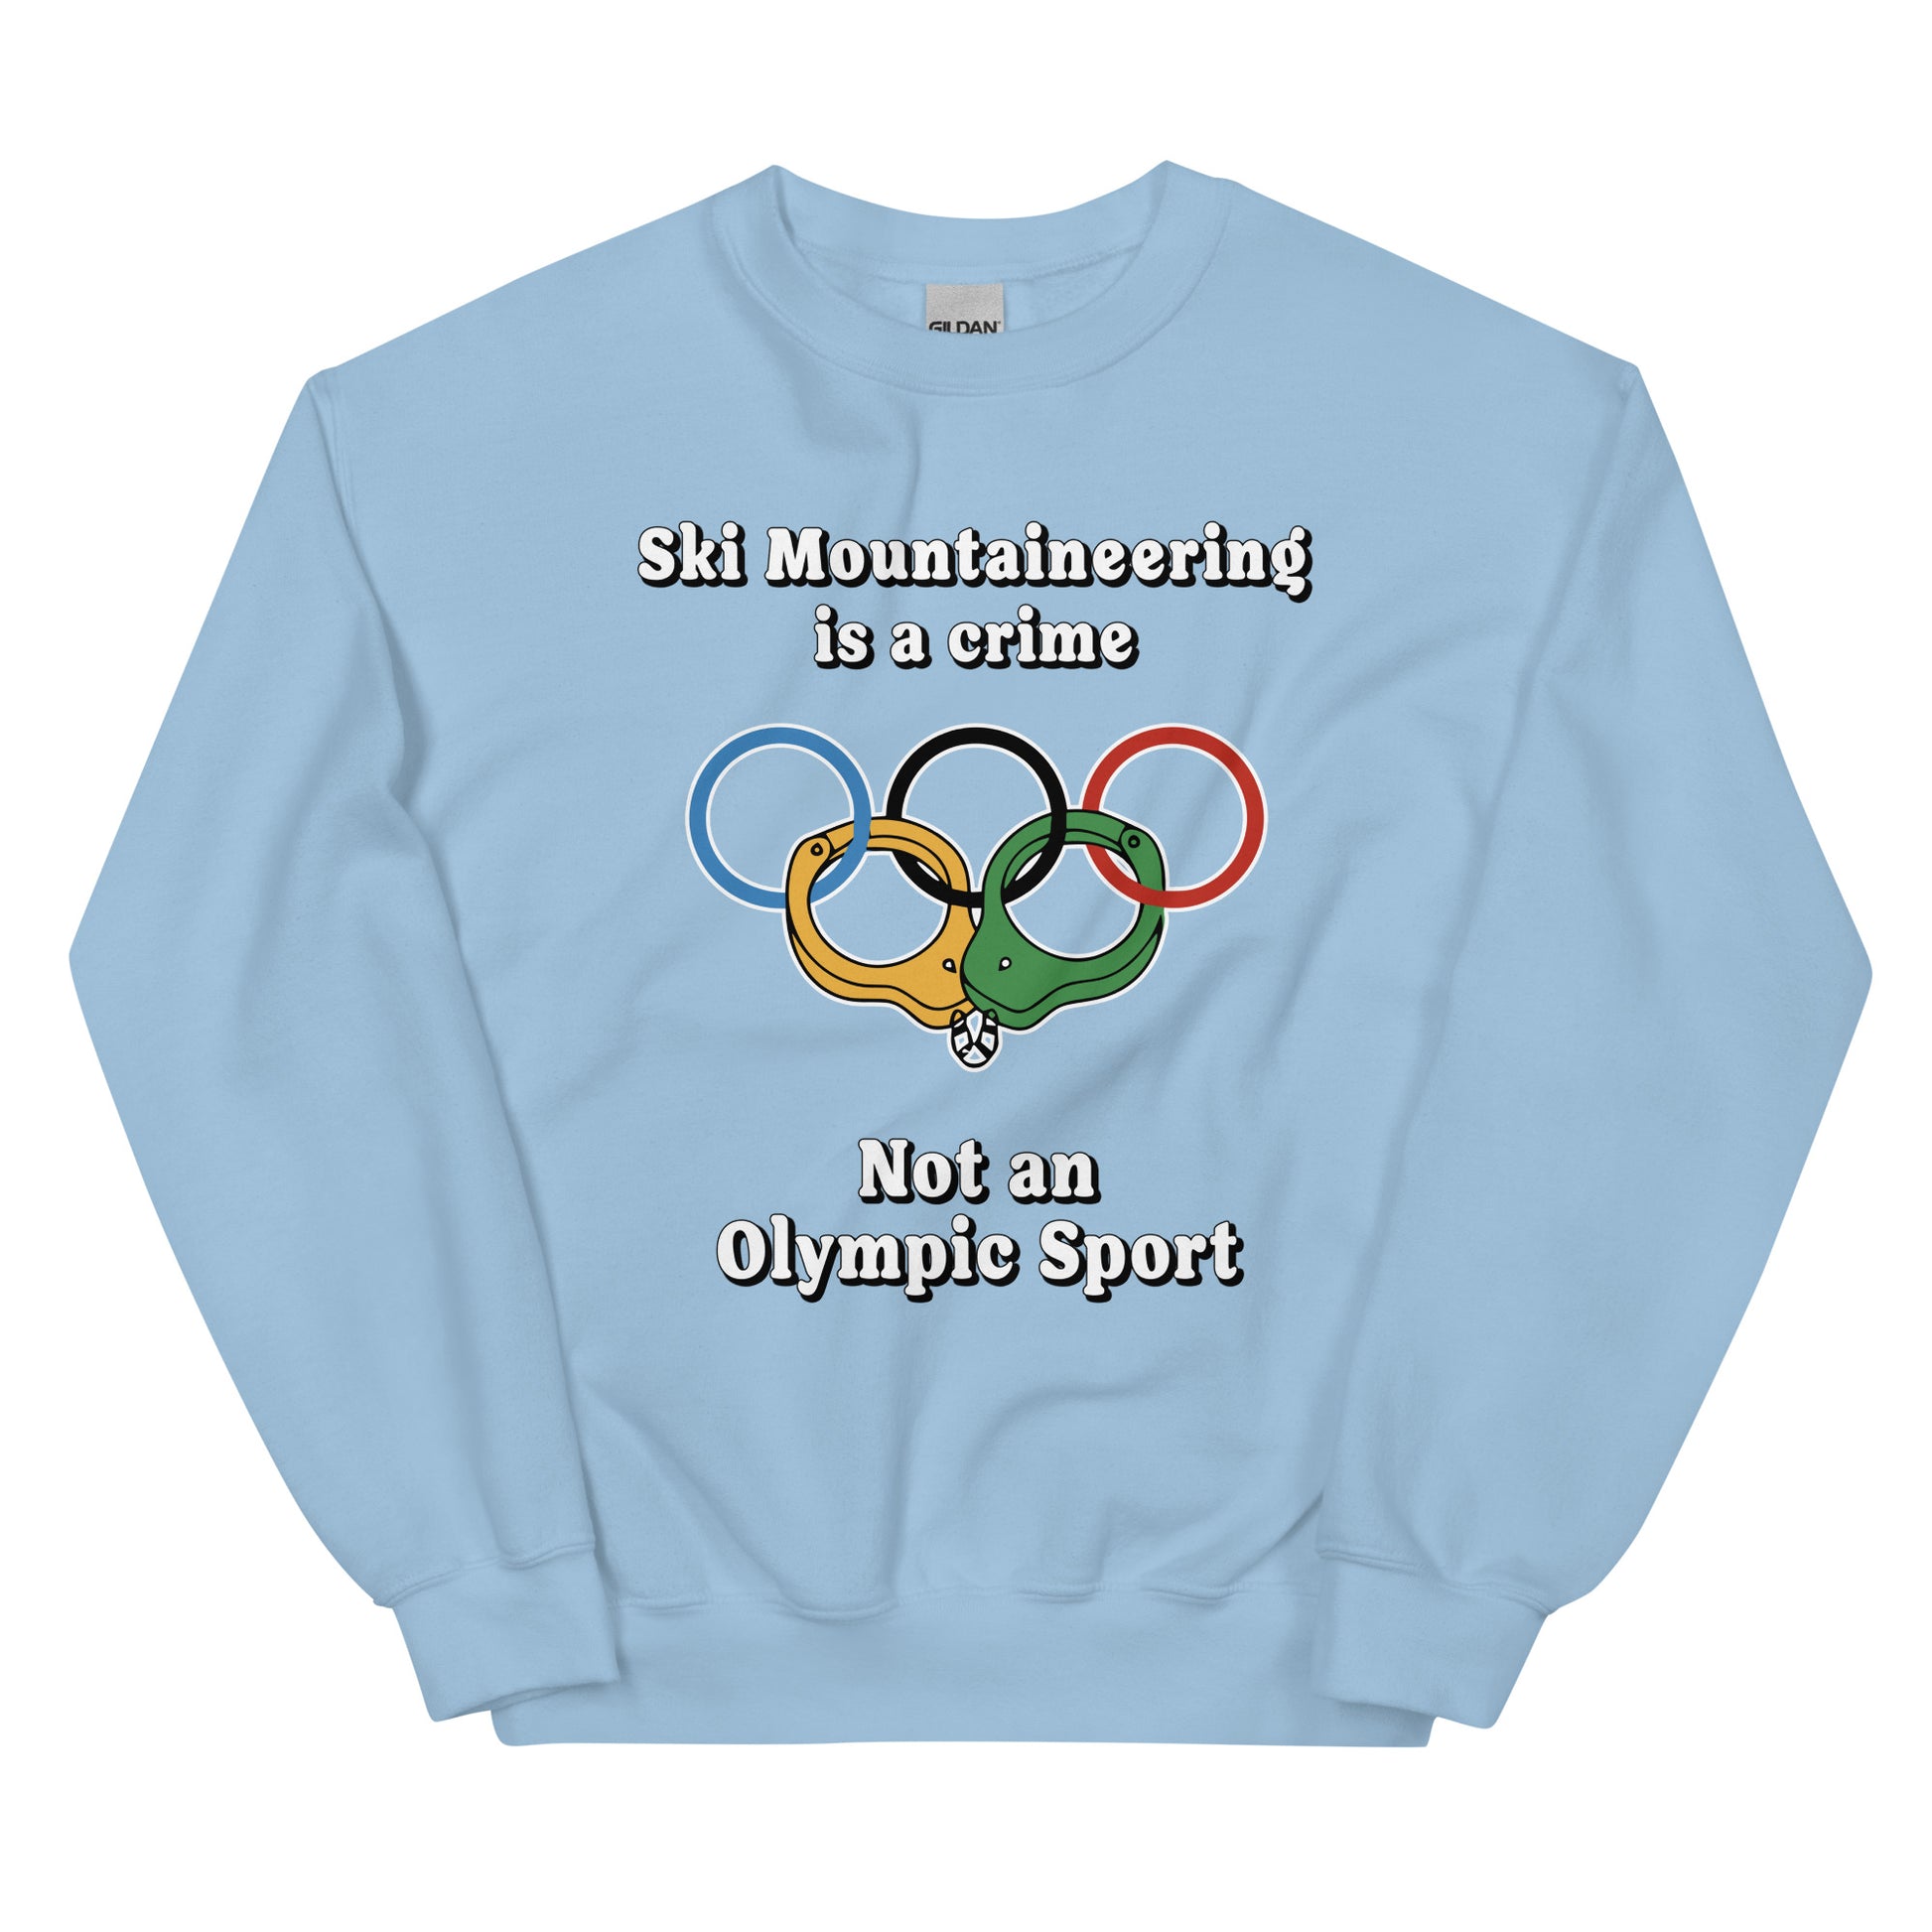 Ski Mountaineering is a crime not an olympic sport design printed on a crewneck sweatshirt by Whistler Shirts